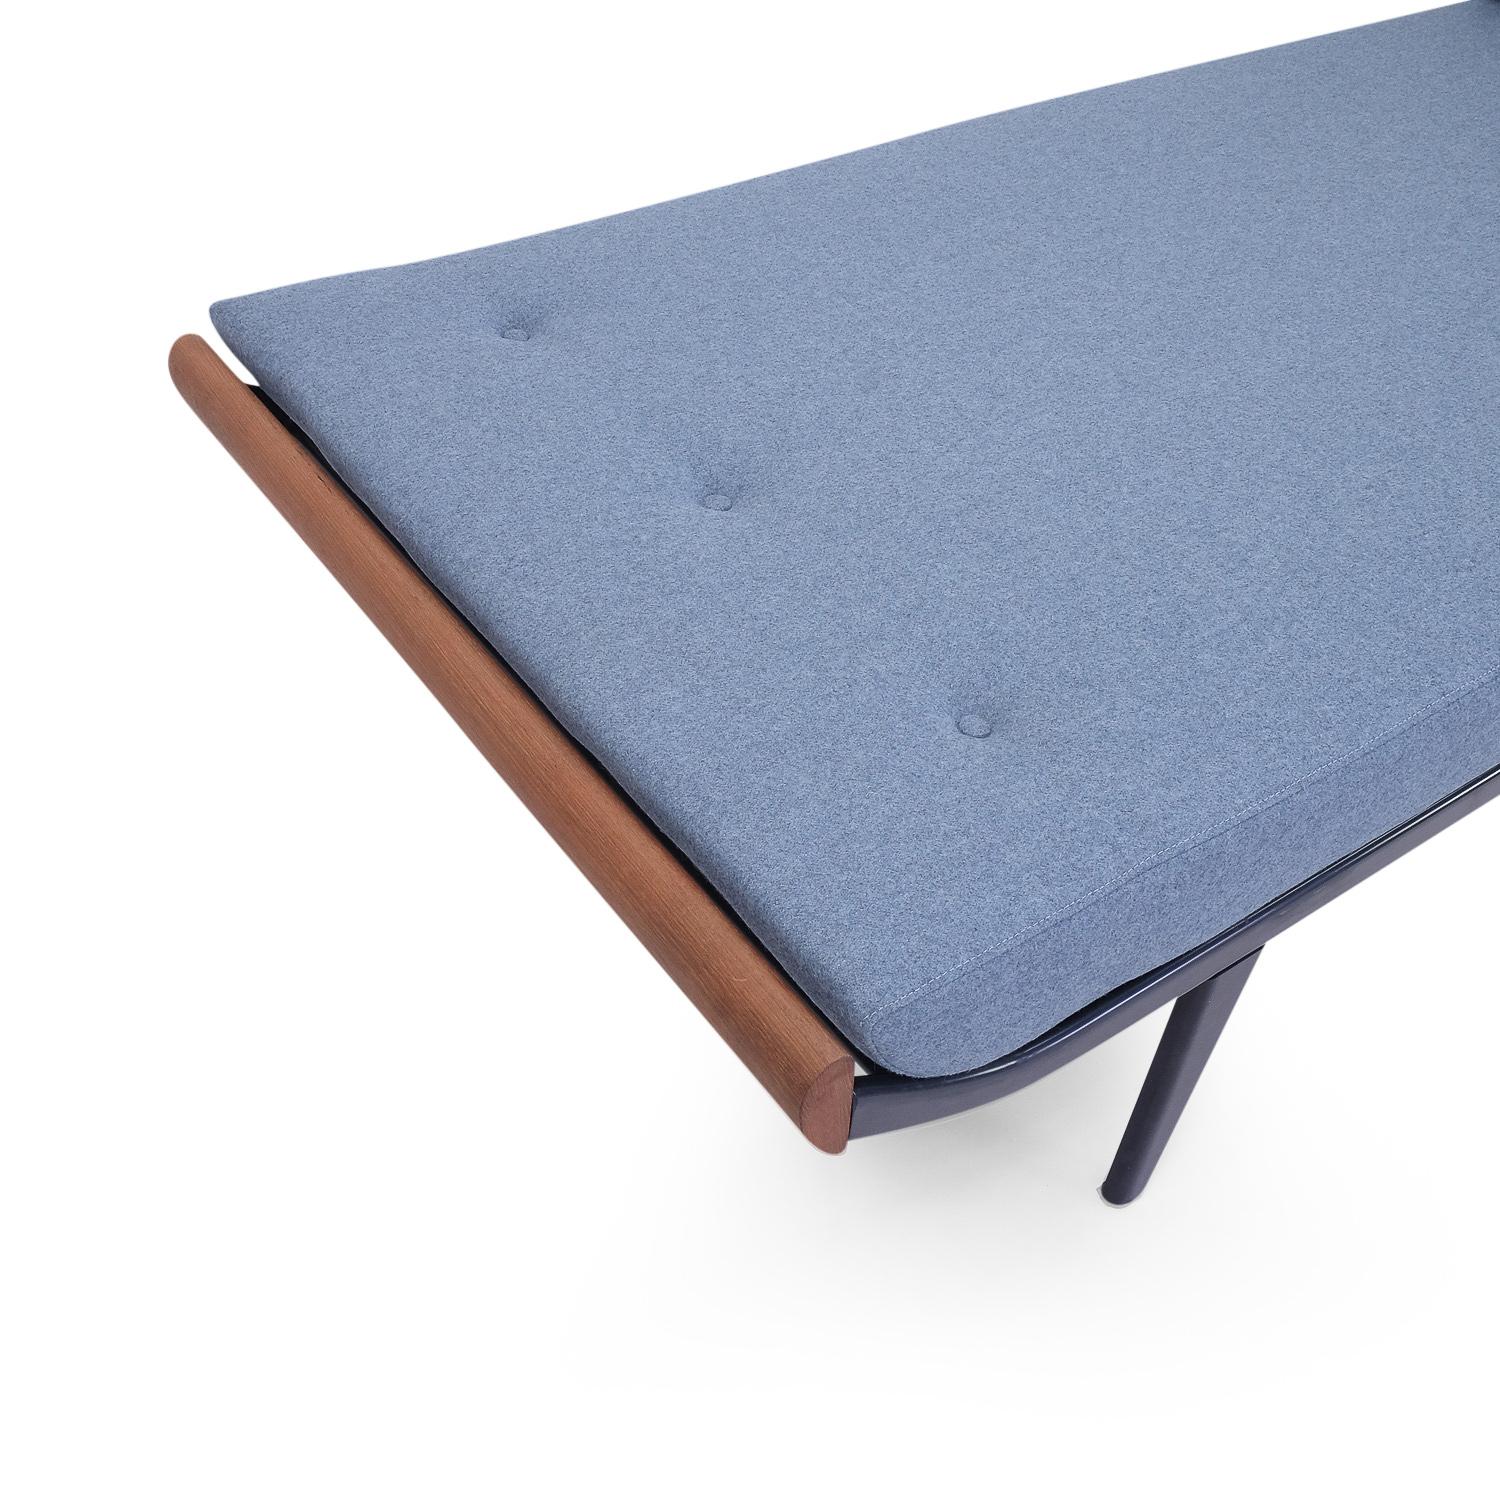 Vintage modernist Industrial daybed designed by Dick Cordemijer for Auping (the Netherlands) during the 1950s.

New high-quality blue woolen upholstery and foam; the daybed can be used as both a sofa and spare bed. The cover features a zipper on